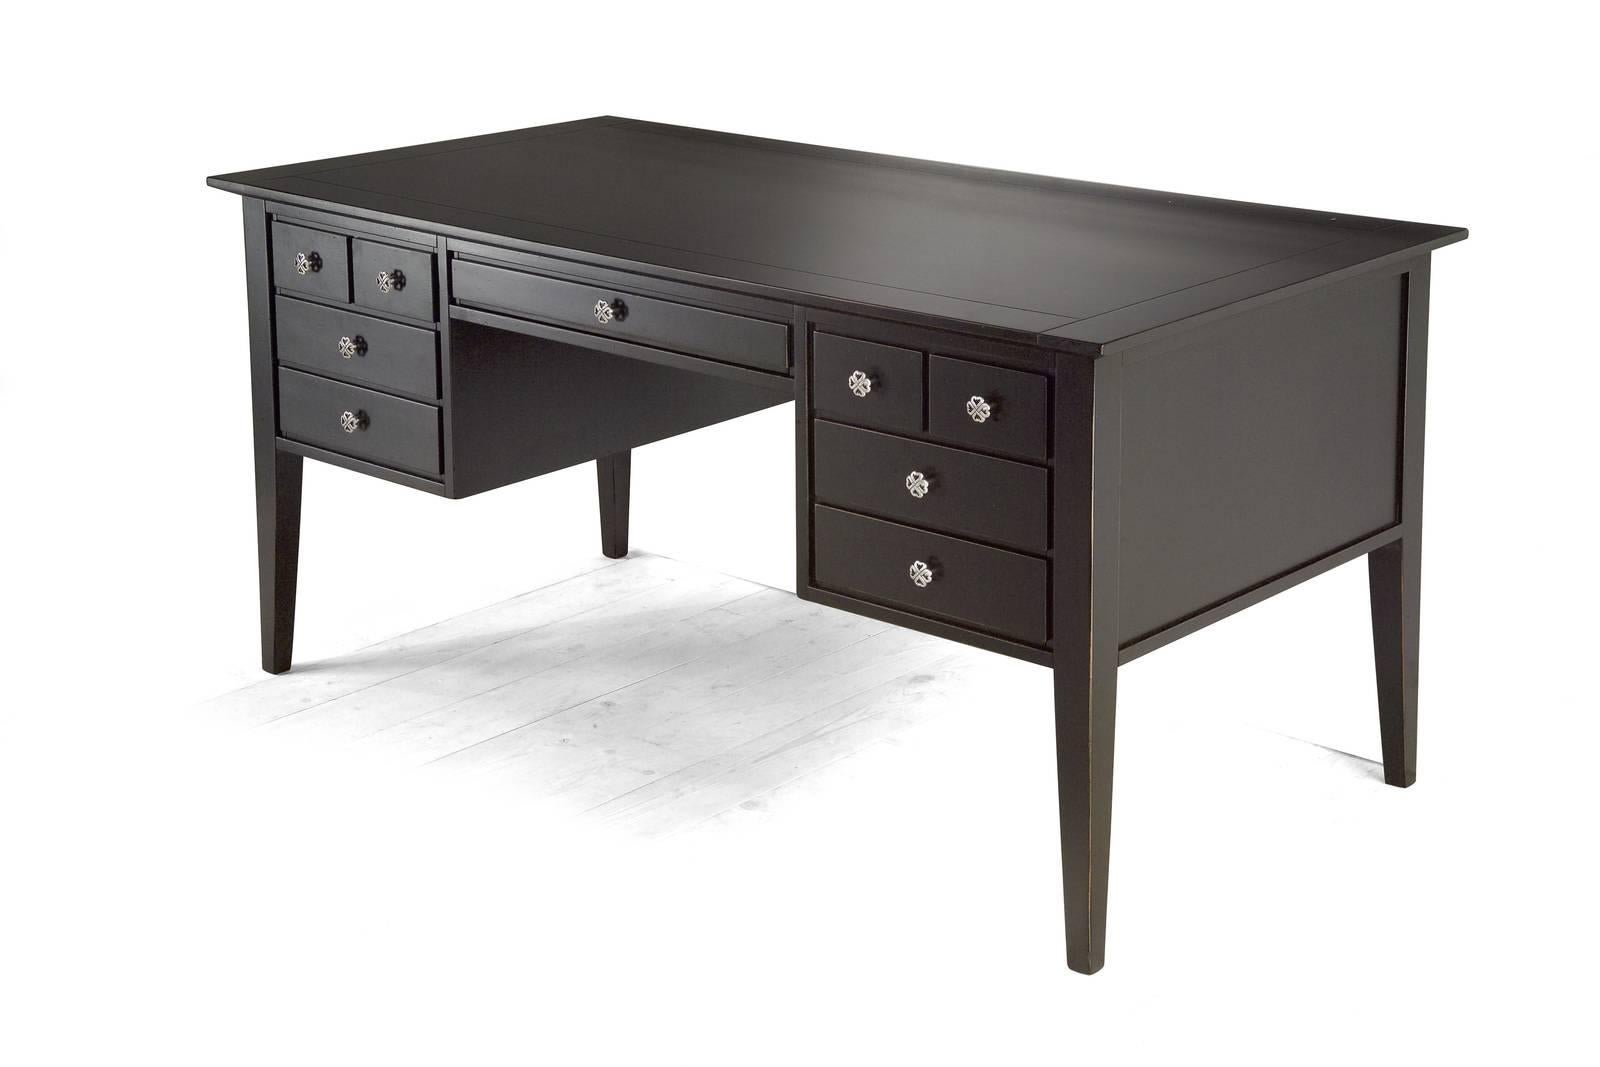 This elegant desk was crafted of solid wood and its timeless shape makes it a refined addition to both a traditional and a modern decor. Its dark finish can be customized, along with sizes, the material used to make the top, and the handles. In this